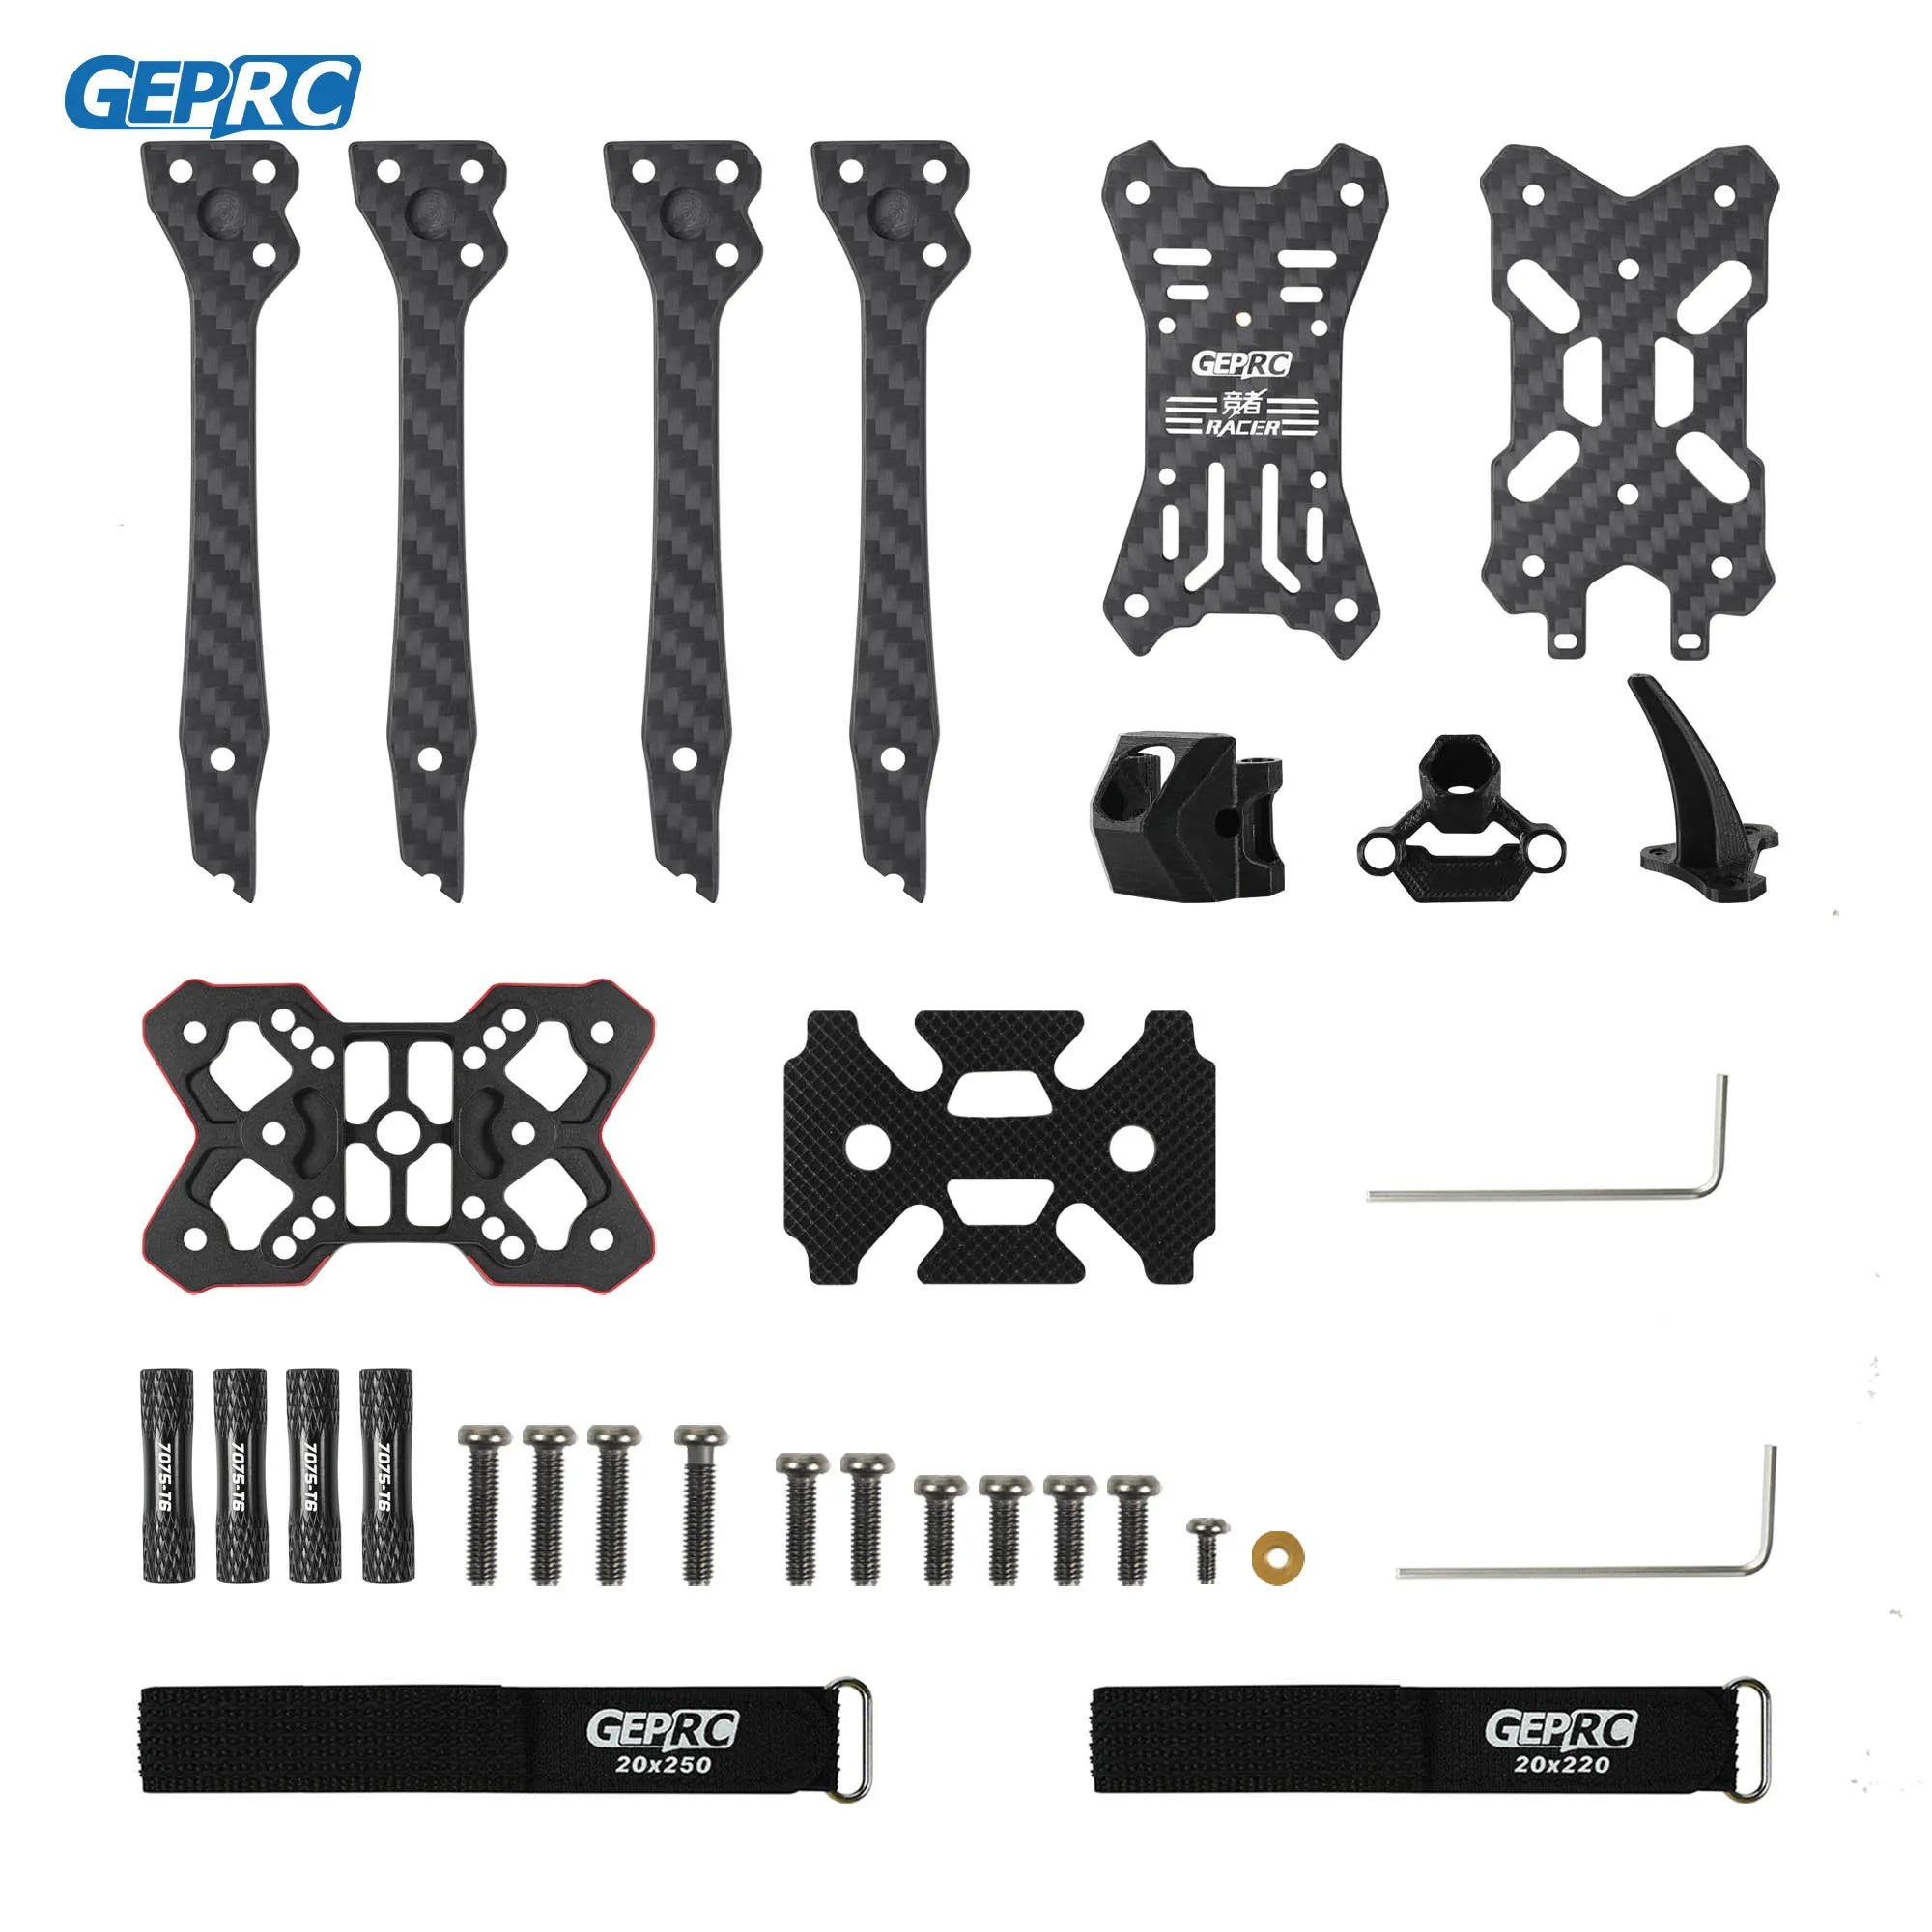 GEPRC GEP-Racer Frame Parts SPECIFICATIONS Brand